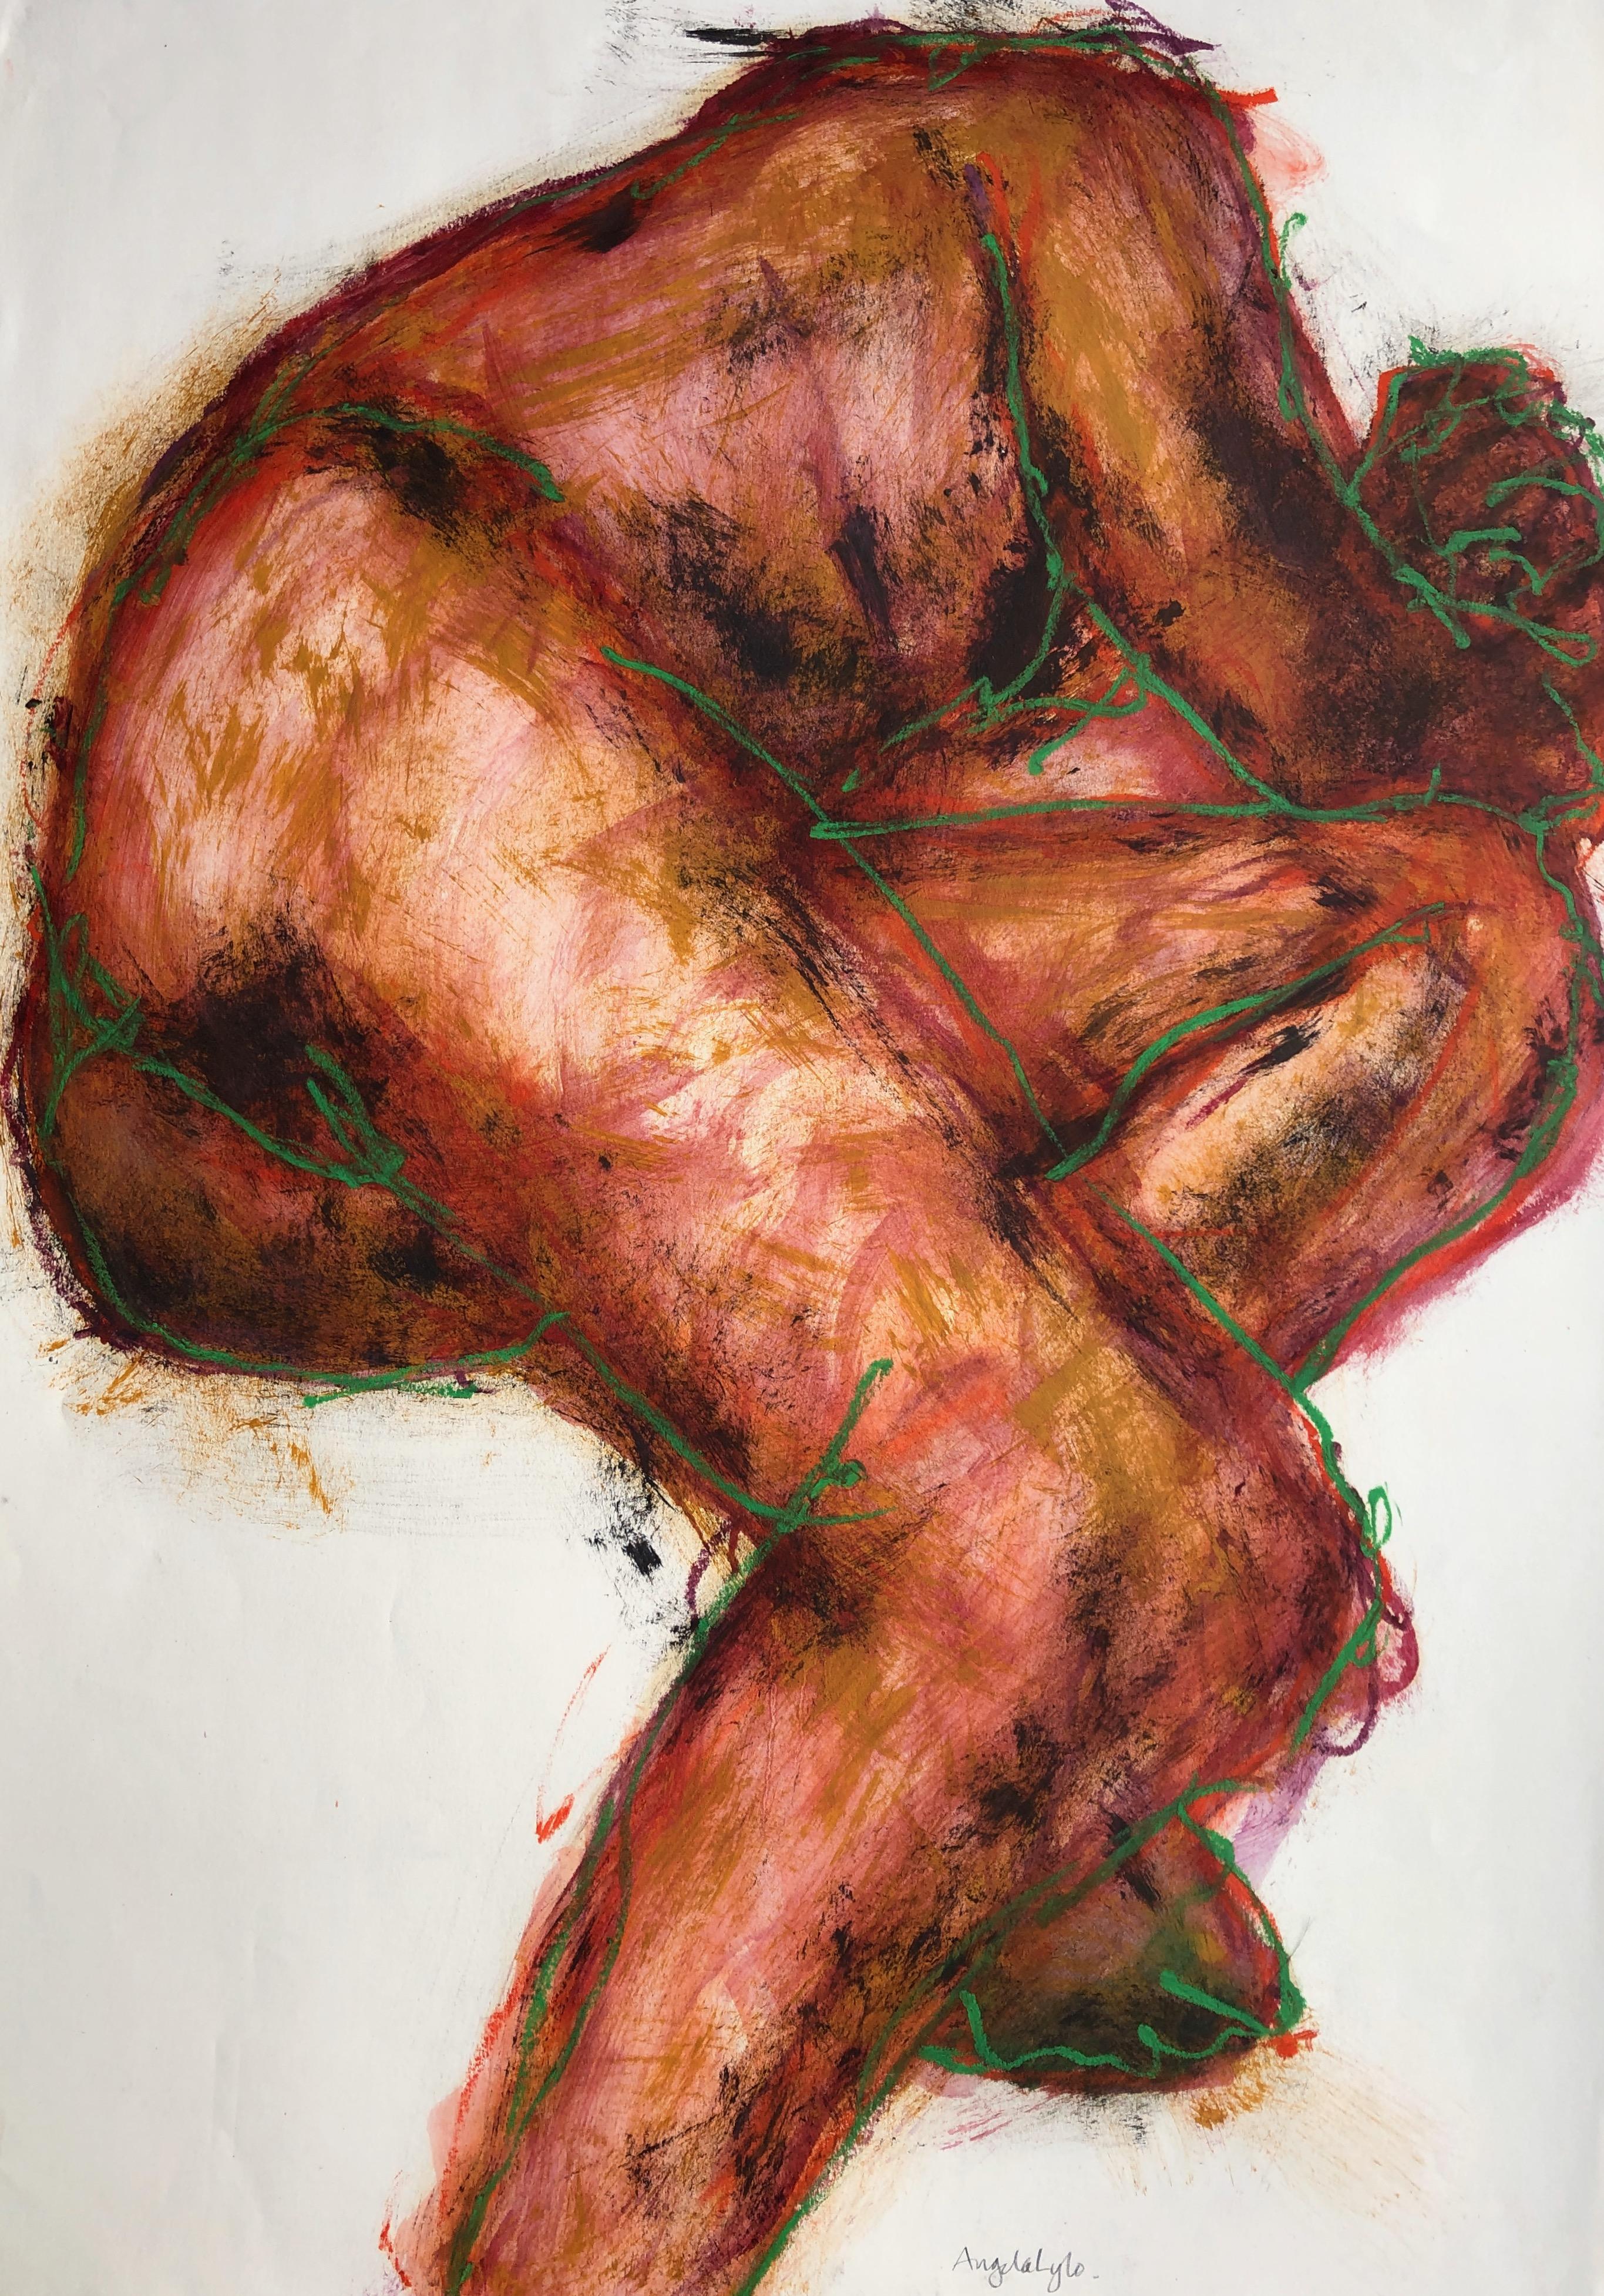 Angela Lyle Nude - Resting Man. Contemporary Mixed Media on paper